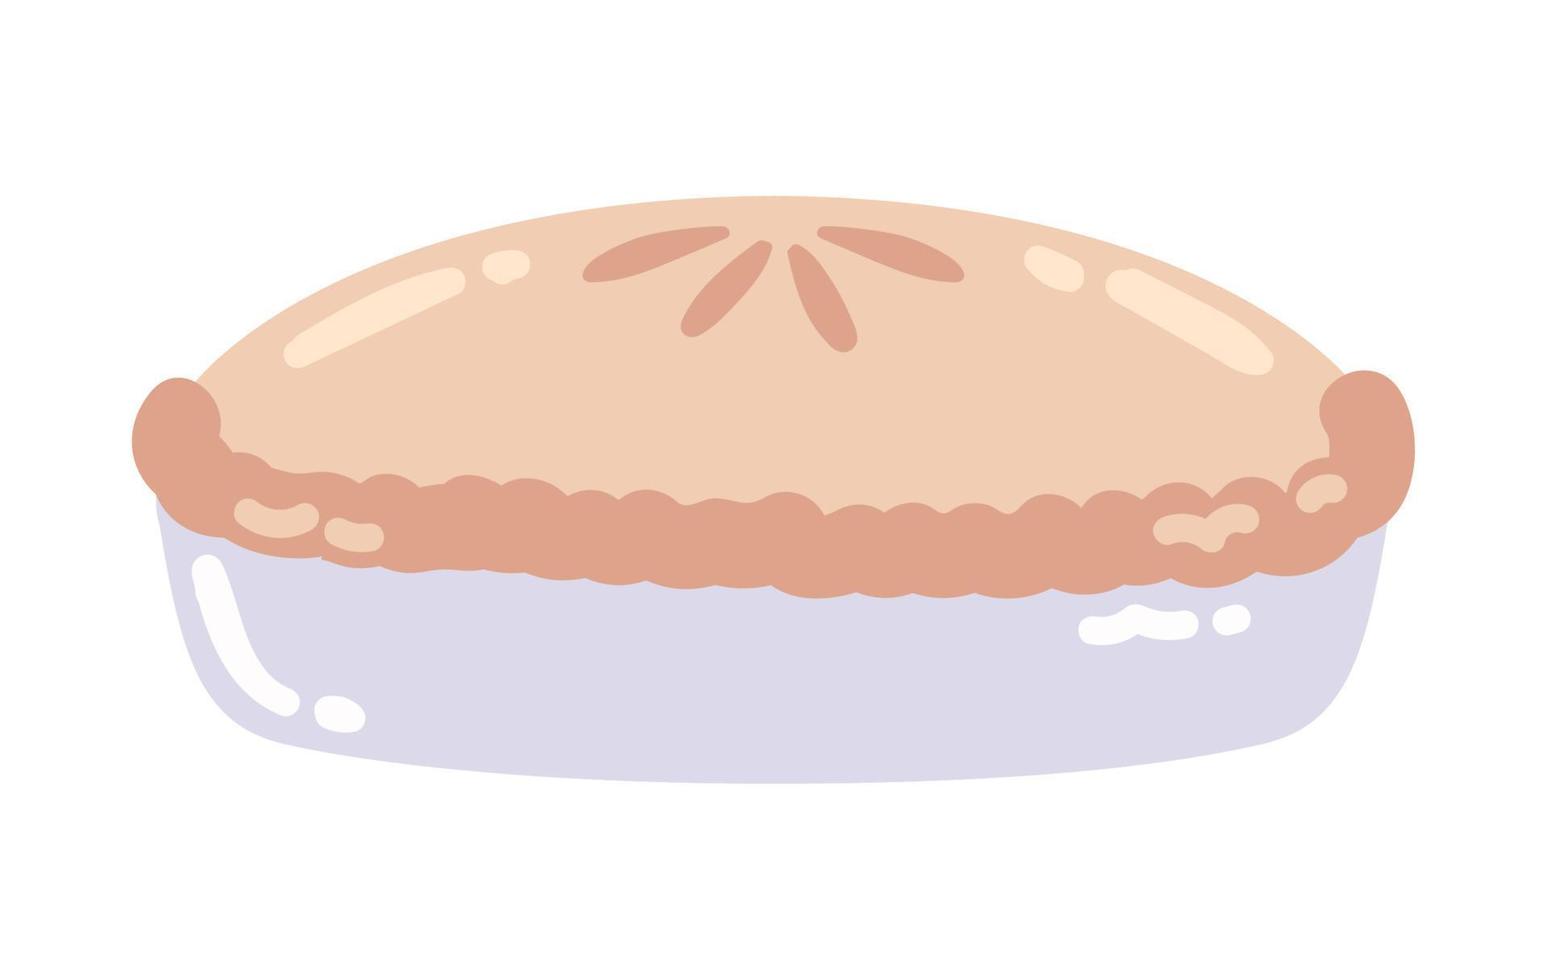 baked cake icon vector